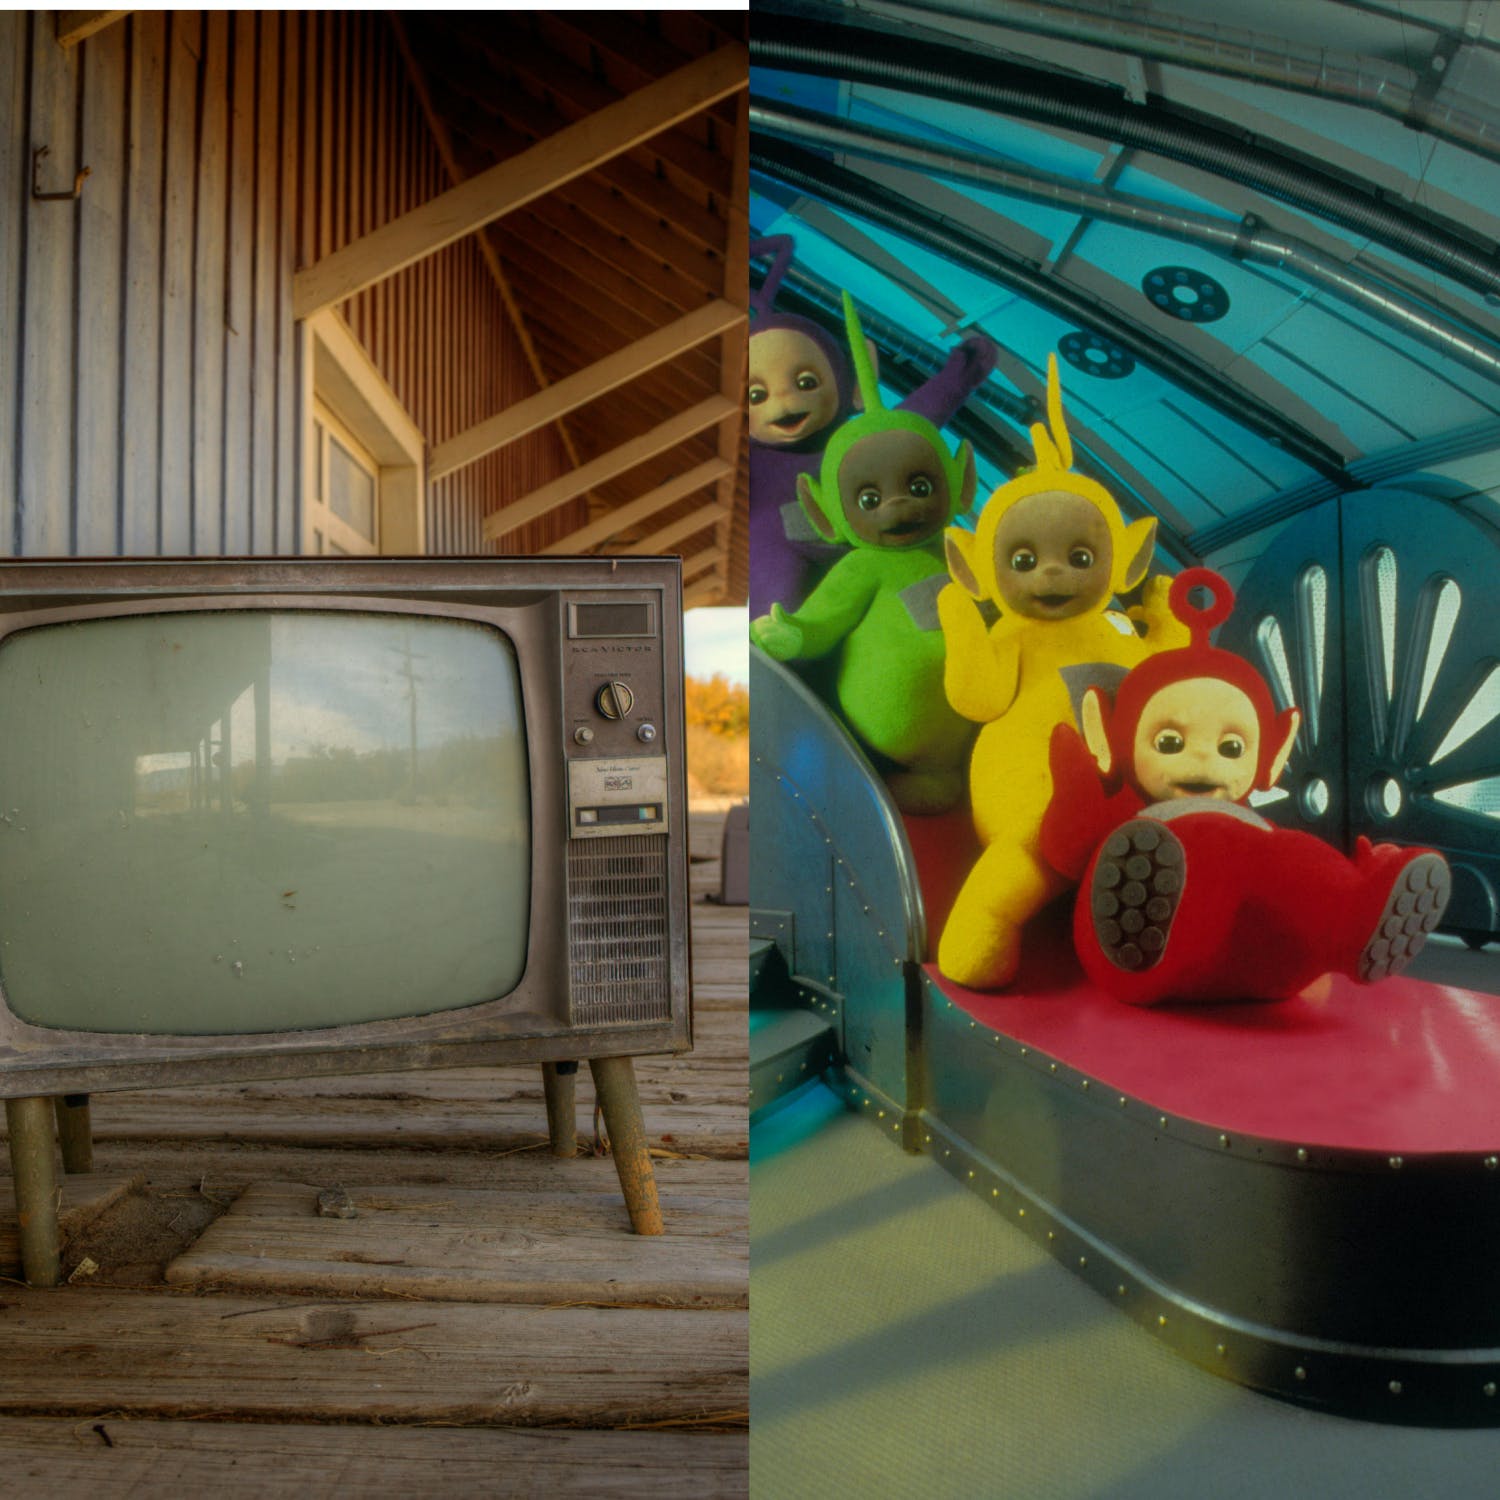 Writing An Ad For Television, And A Change To The Teletubbies Format?